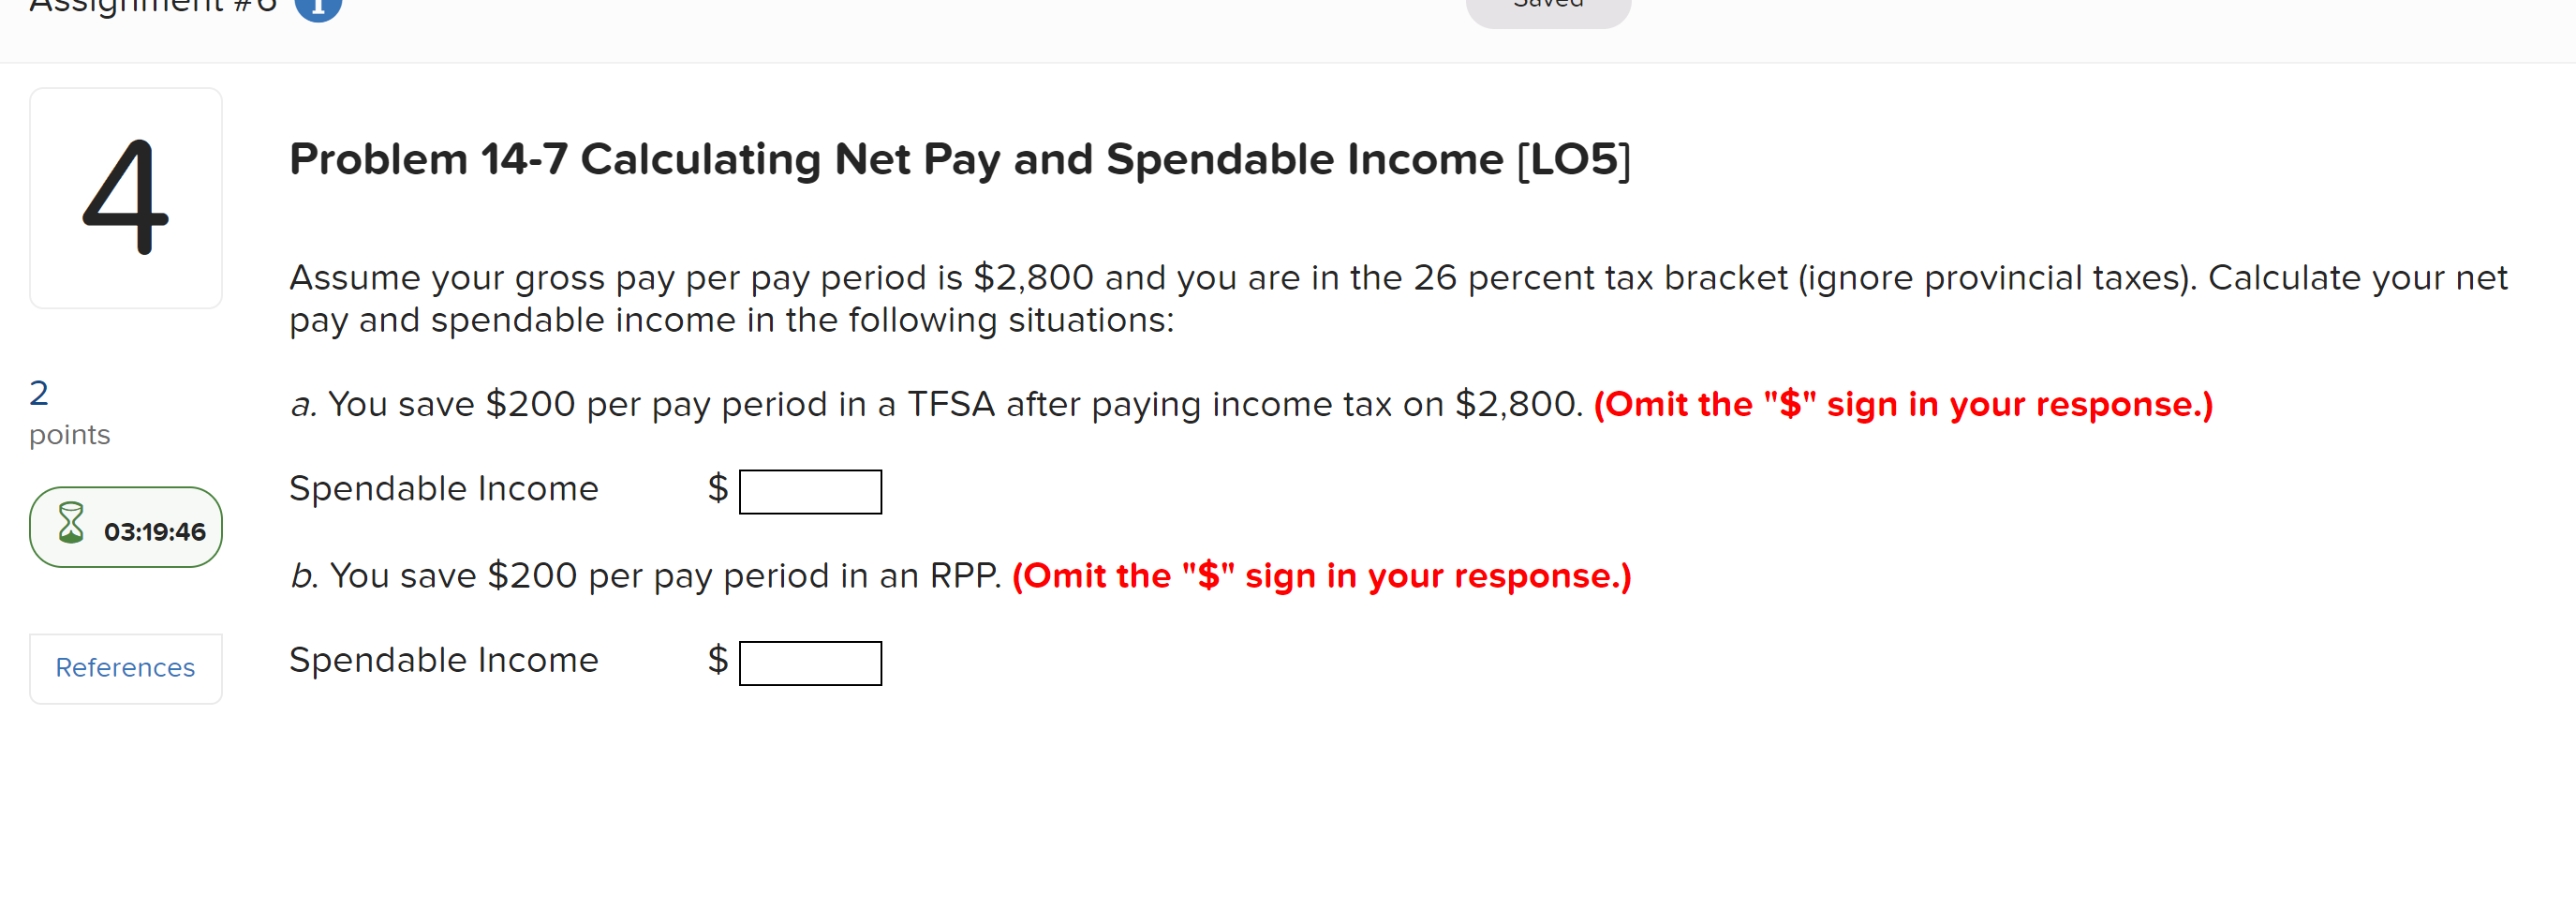 problem-14-7-calculating-net-pay-and-spendable-income-lo5-4-assume-your-gross-pay-per-pay